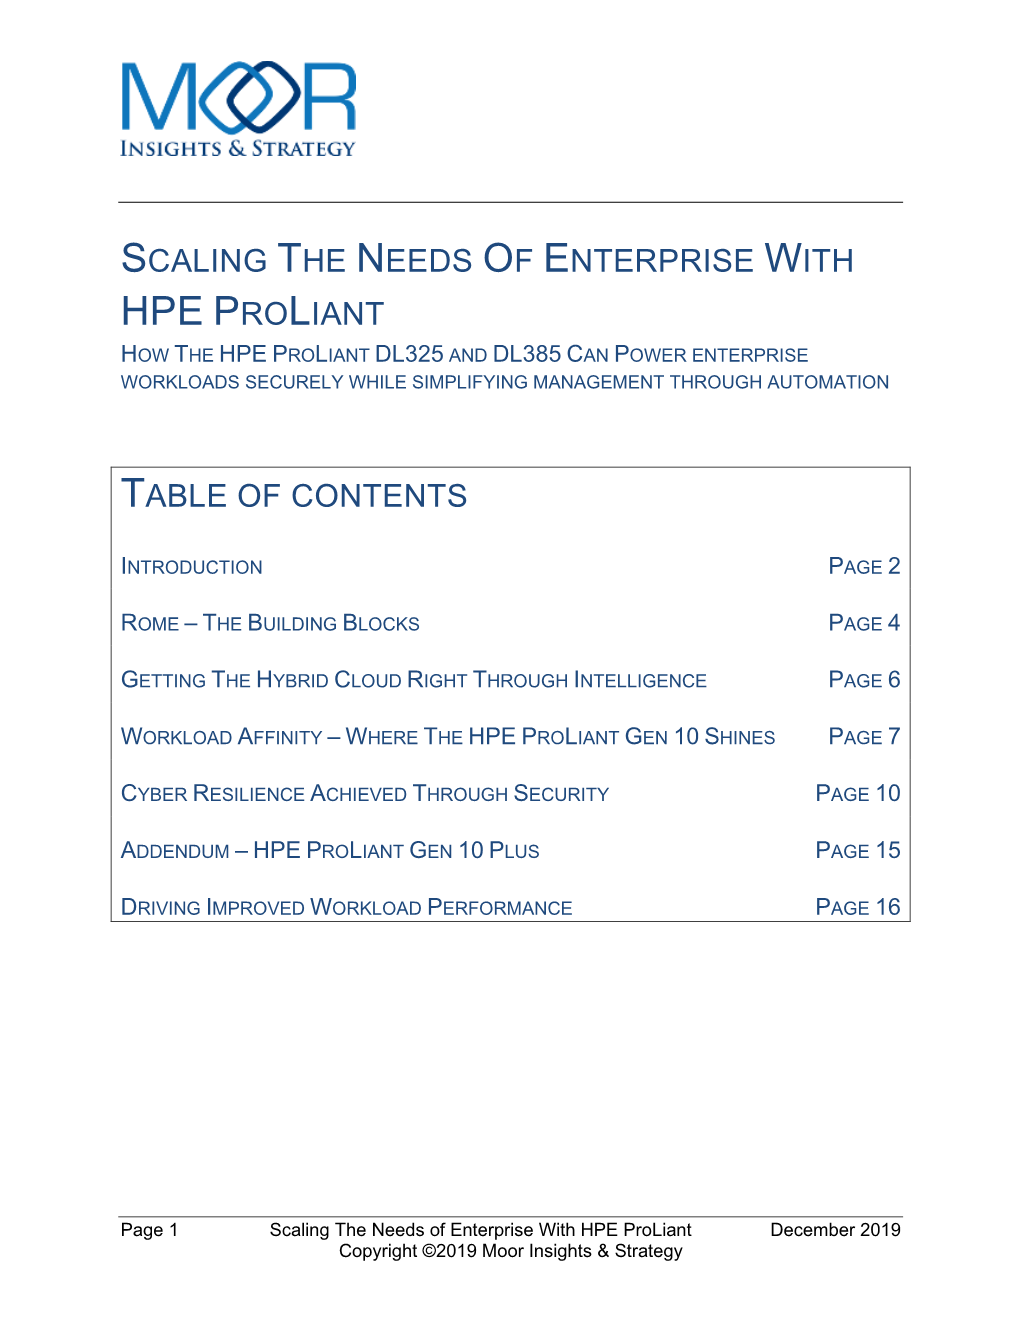 Scaling the Needs of Enterprise with Hpe Proliant